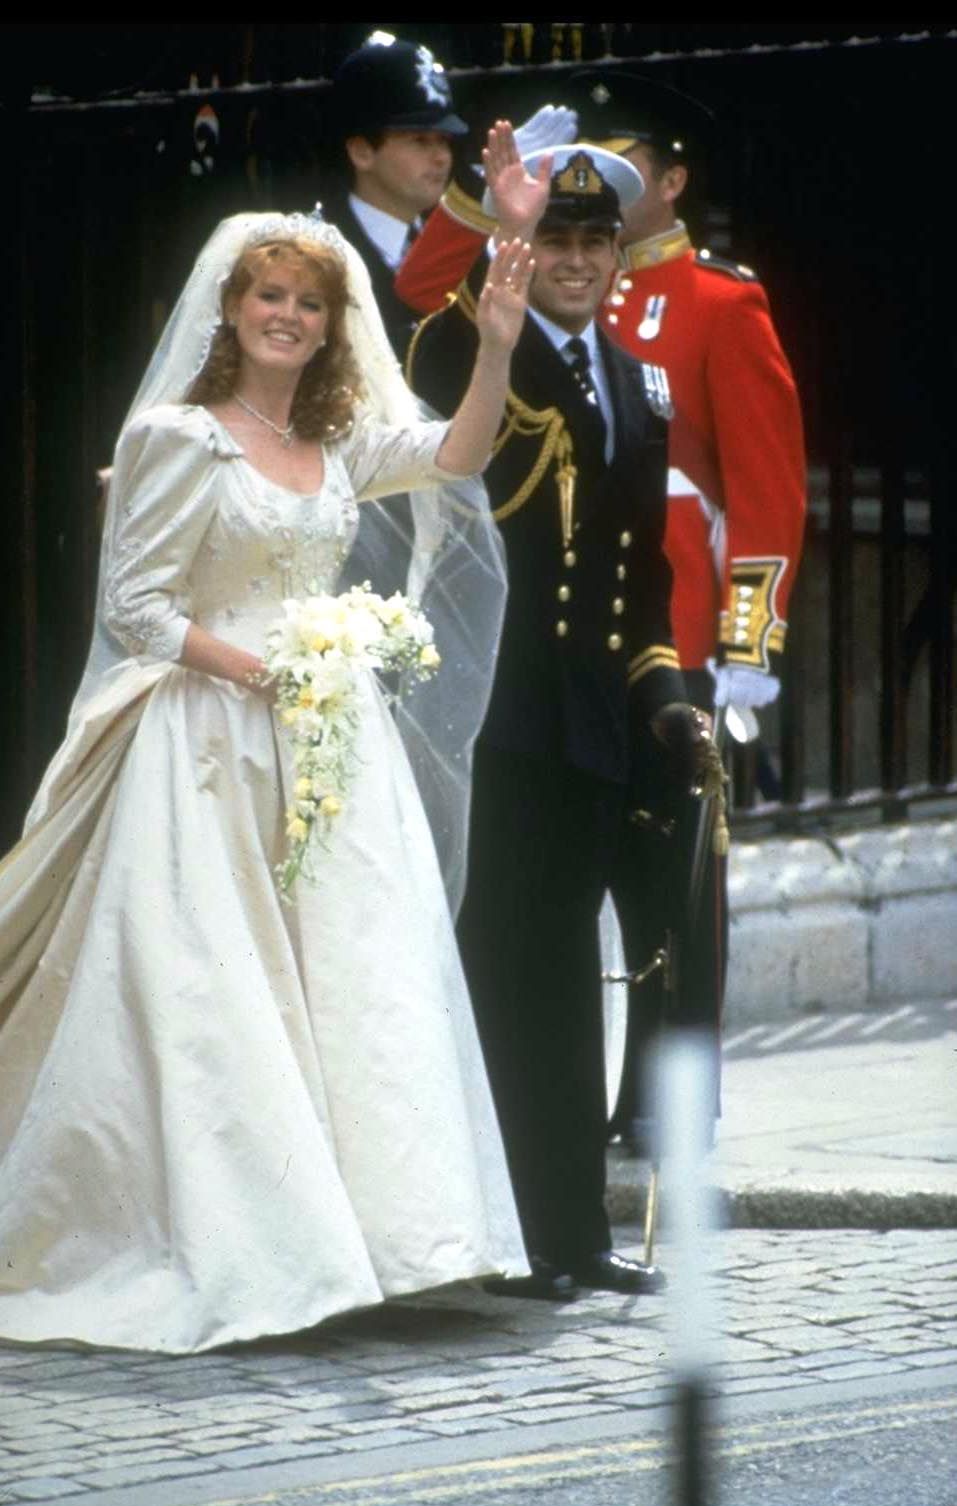 Sarah Ferguson's wedding dress was created by Lindka Cierach for her 1986 marriage to Prince Andrew.